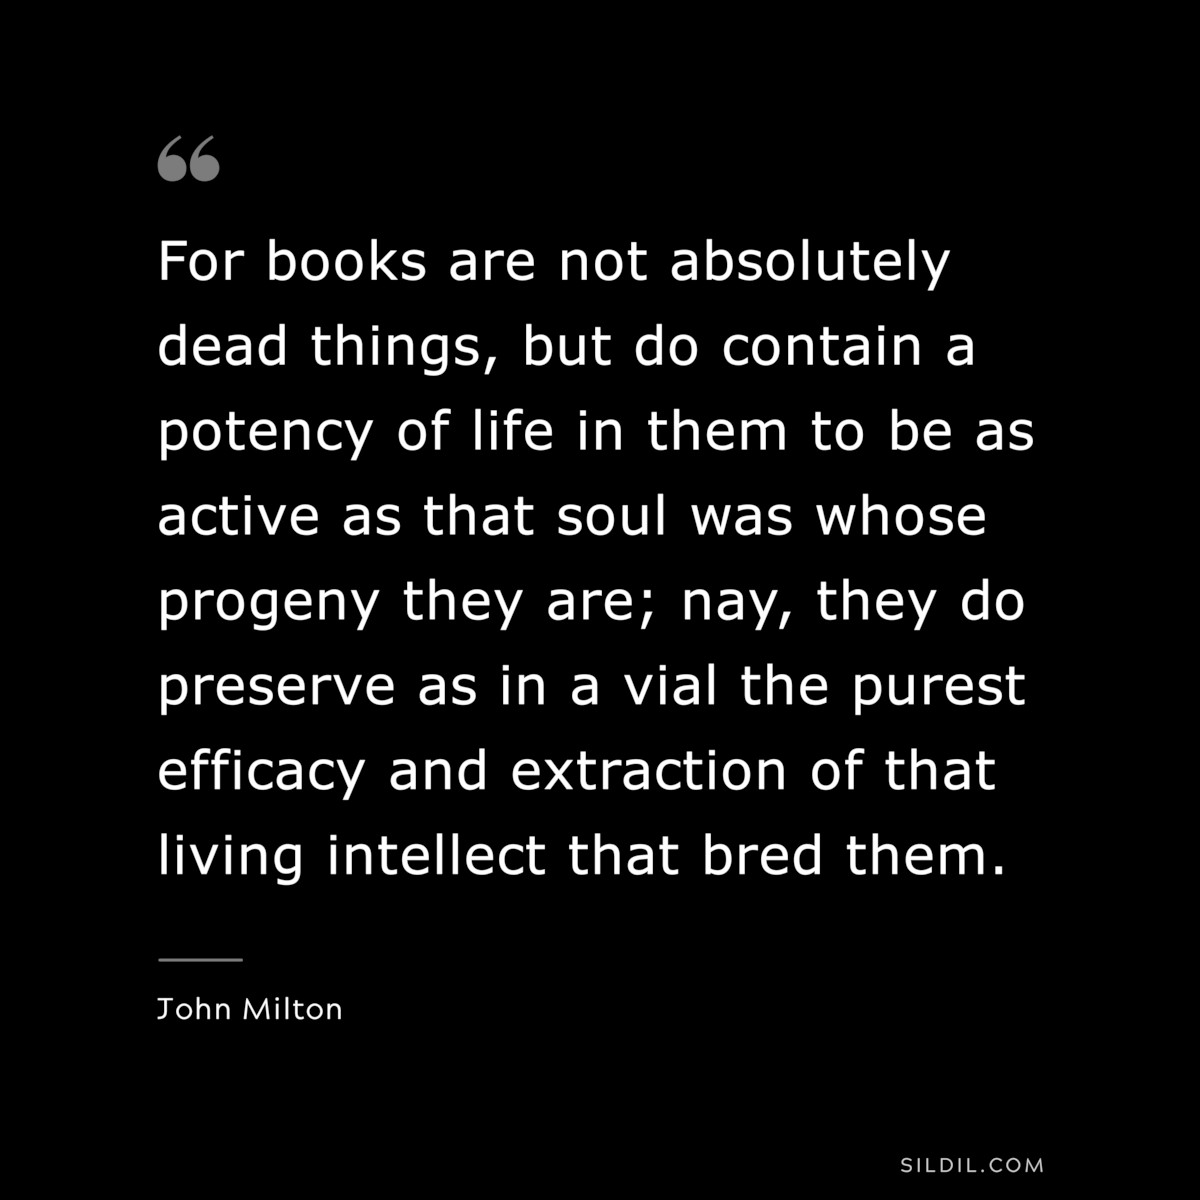 For books are not absolutely dead things, but do contain a potency of life in them to be as active as that soul was whose progeny they are; nay, they do preserve as in a vial the purest efficacy and extraction of that living intellect that bred them. ― John Milton